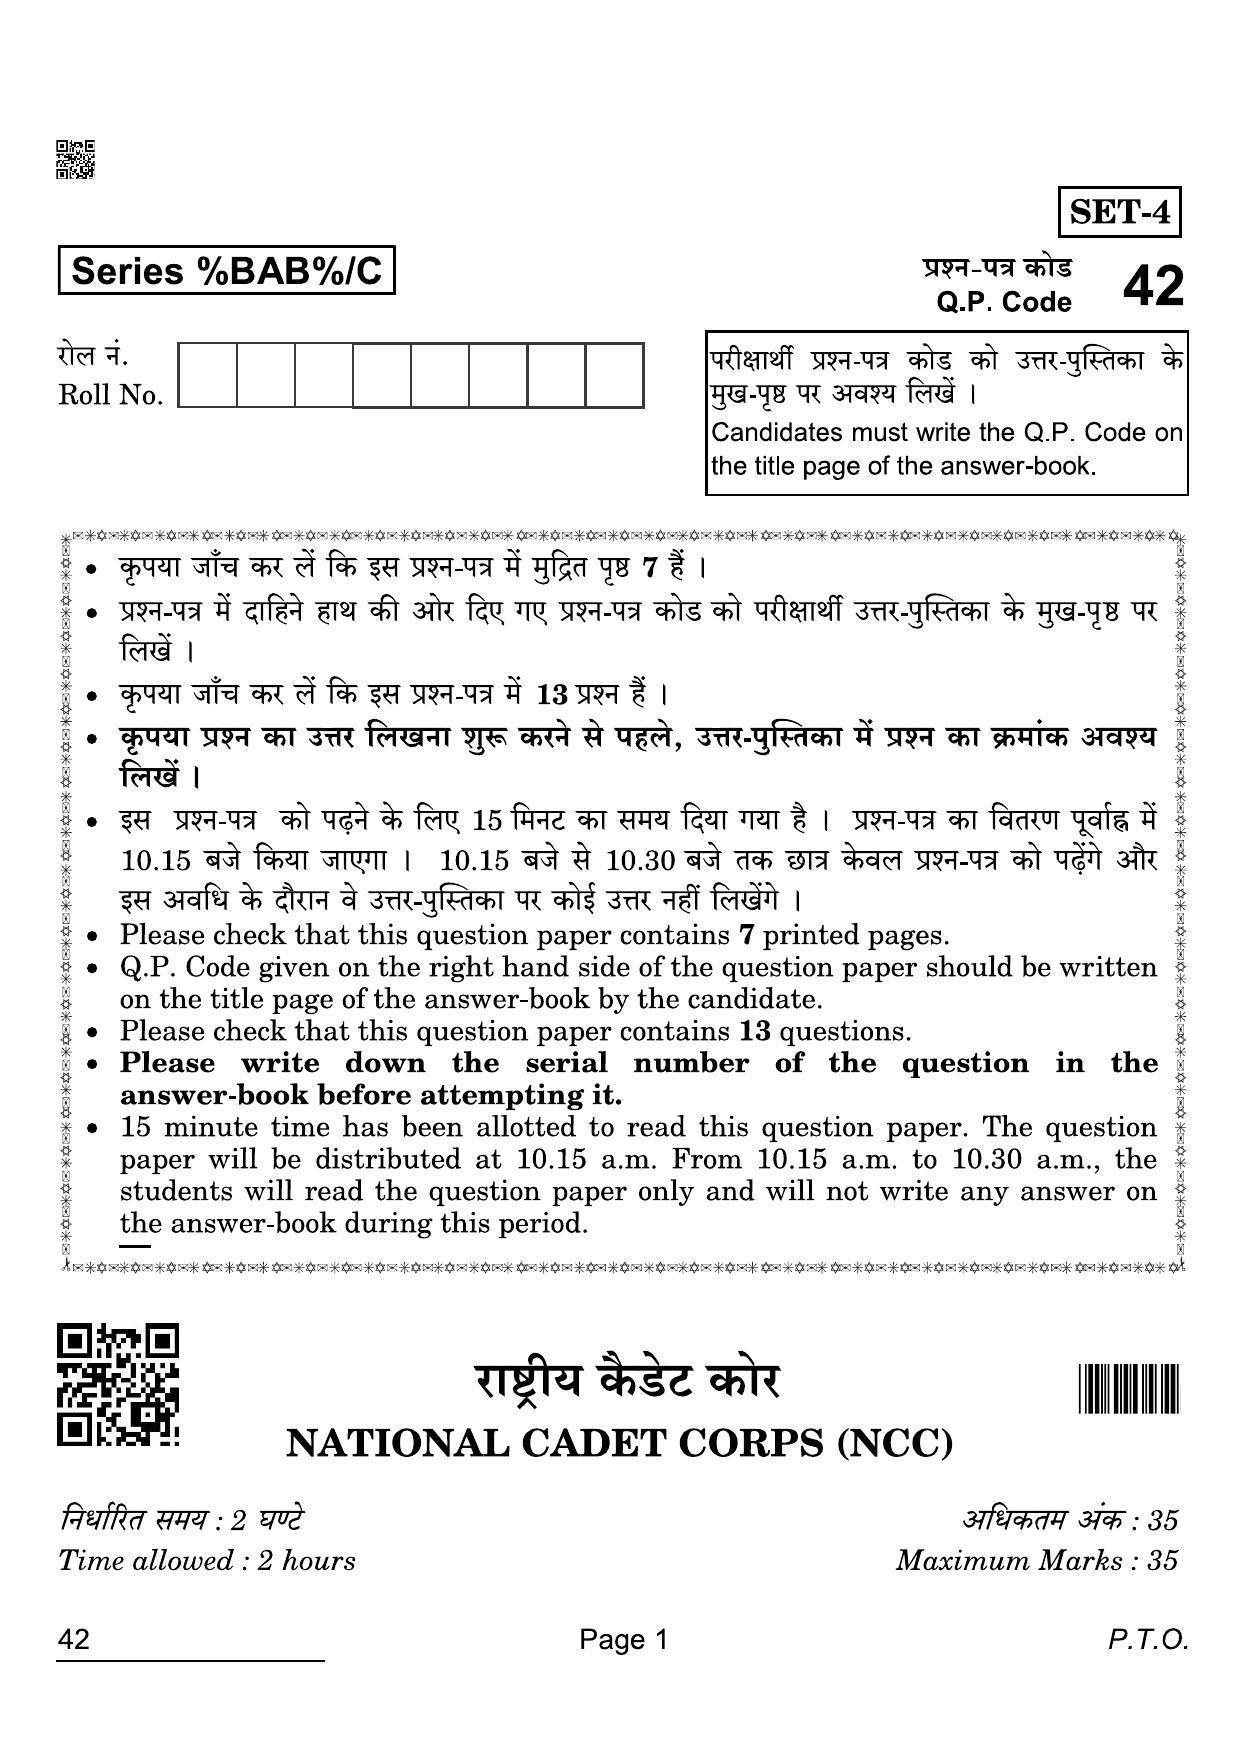 CBSE Class 12 42 NCC 2022 Compartment Question Paper - Page 1